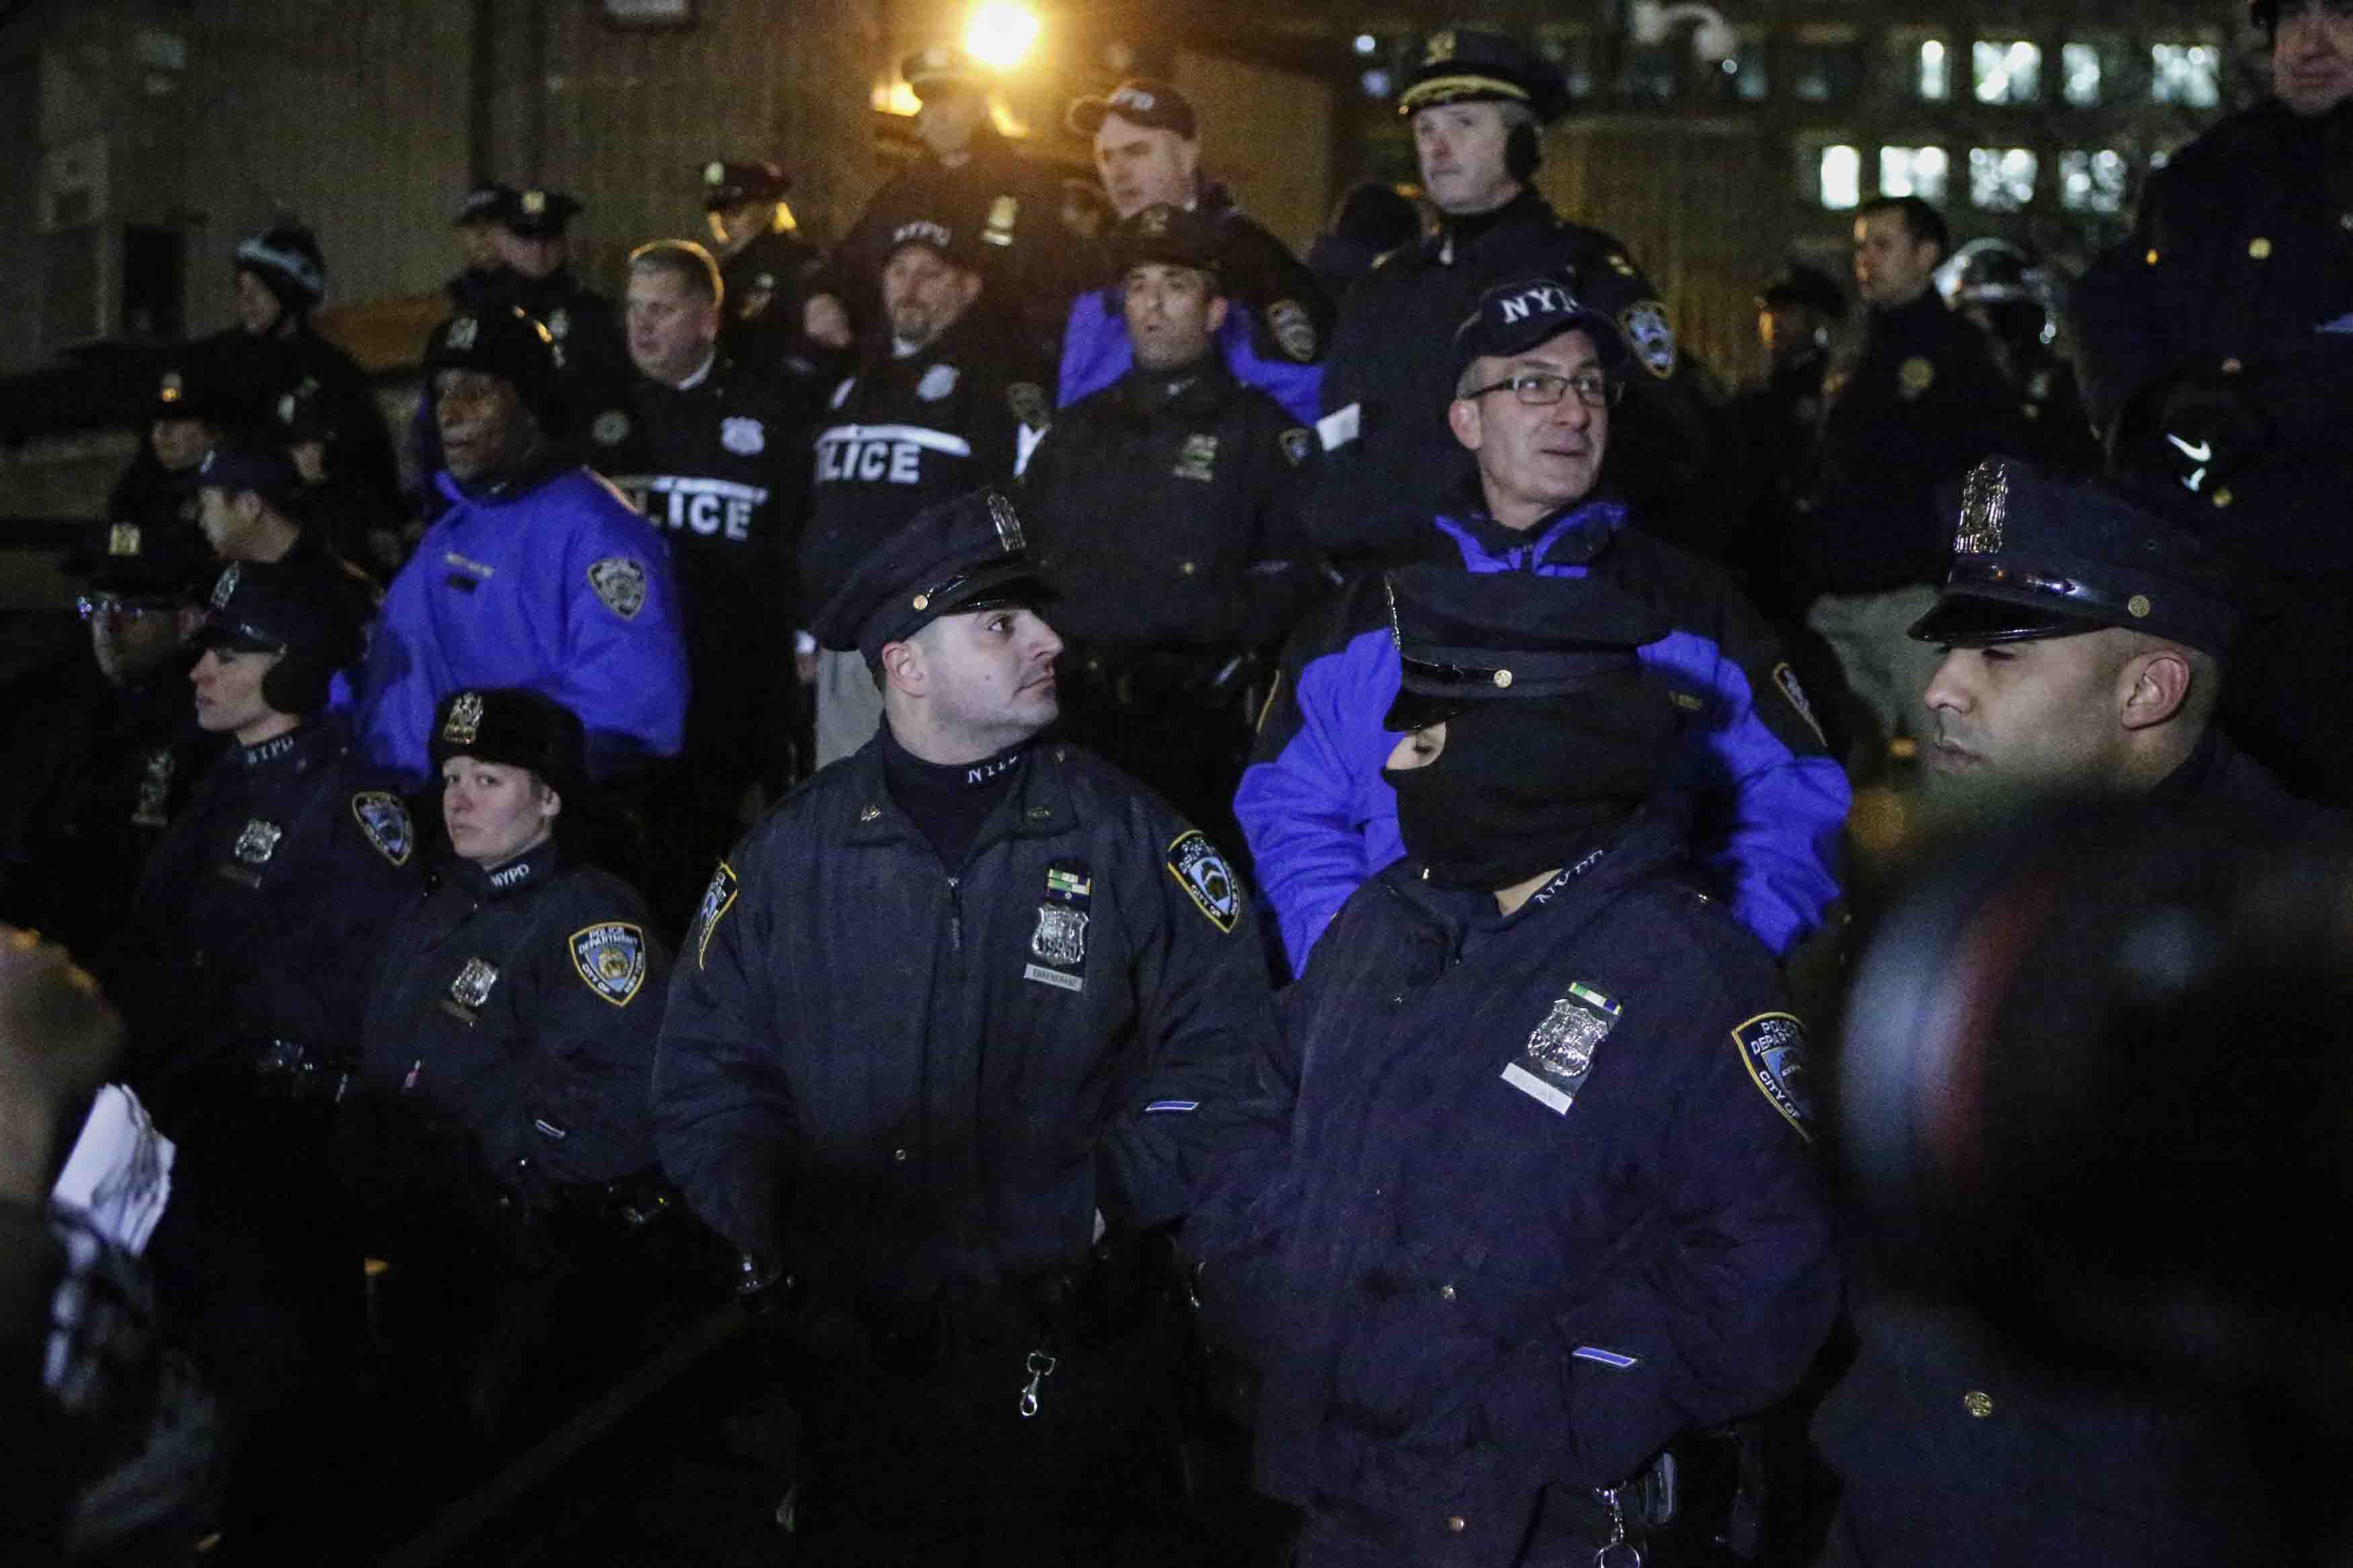 NYPD officers stand guard during the National March Against Police Violence, which was organized by National Action Network, at One Police Plaza on December 13, 2014 in New York City. (Kena Betancur—Getty Images)